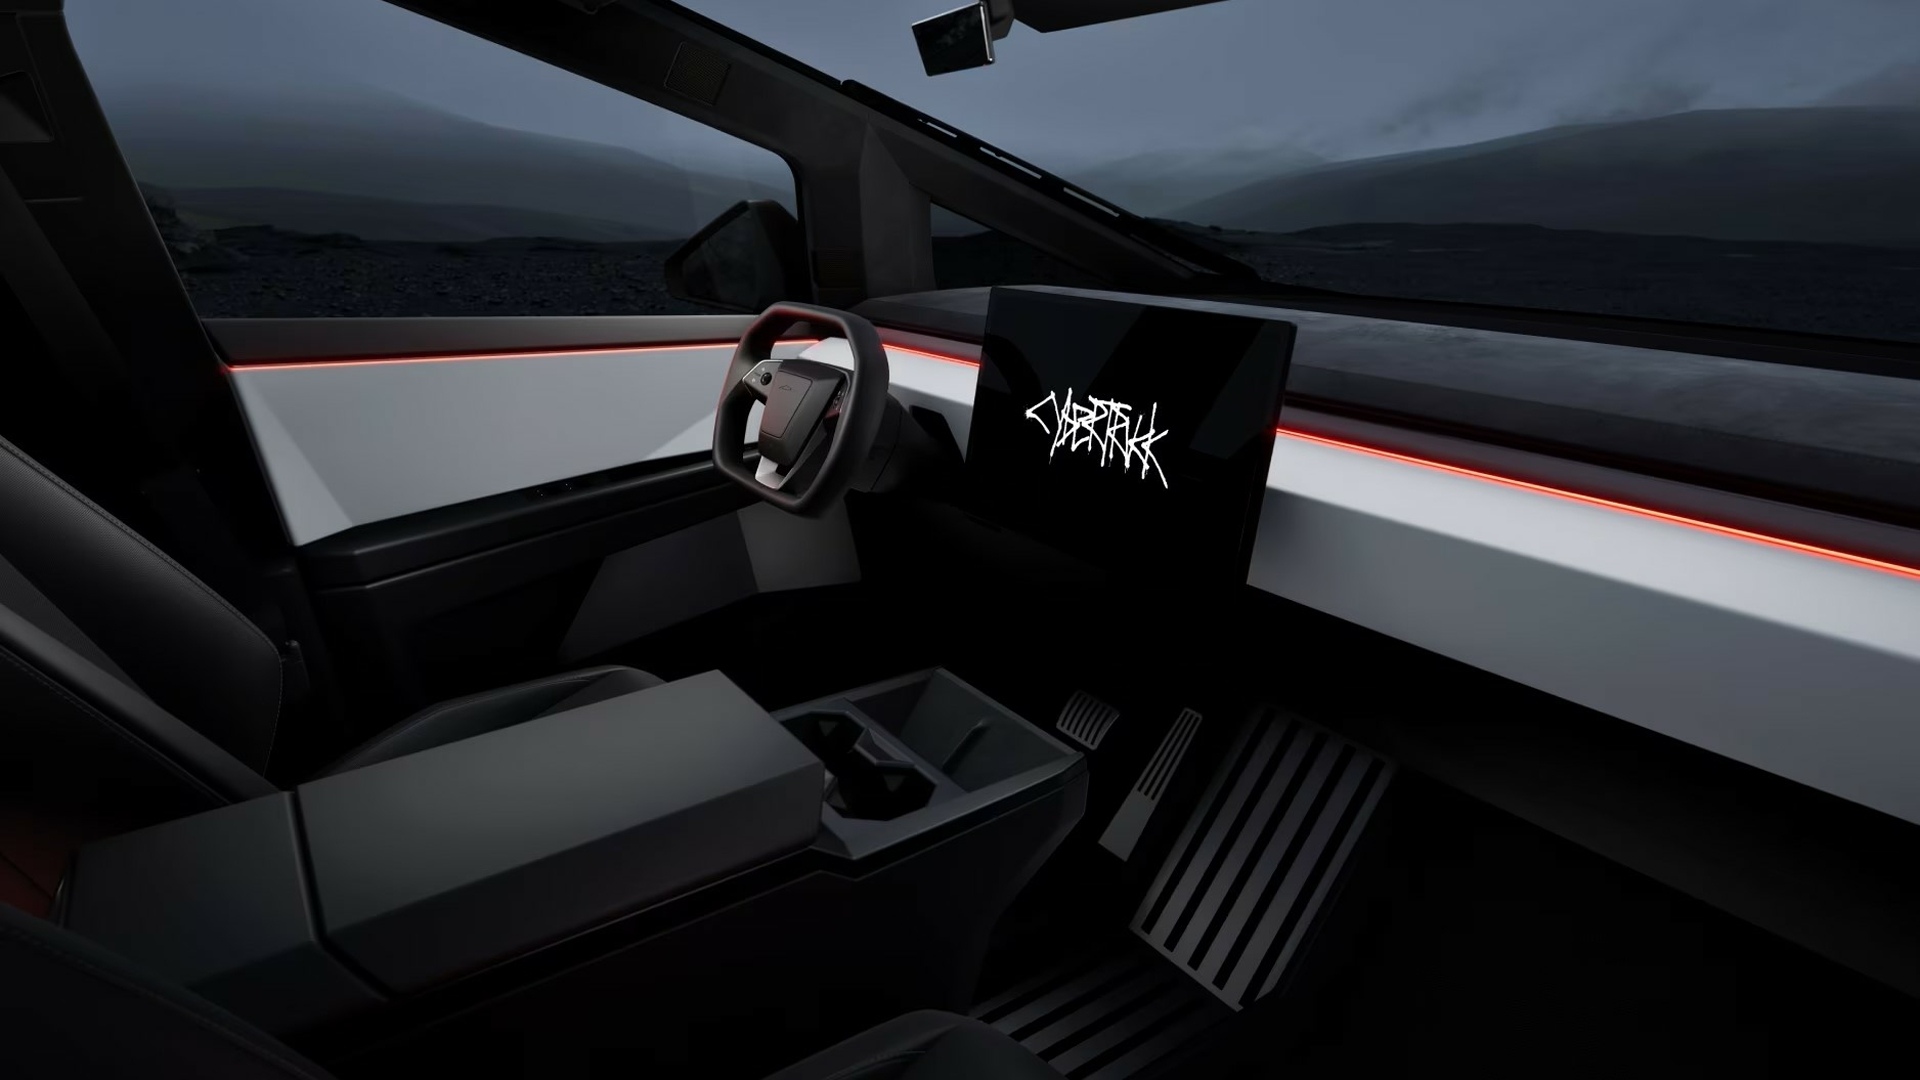 The Interior, Steering And Central Console Of A Tesla Cybertruck (Credits Tesla)